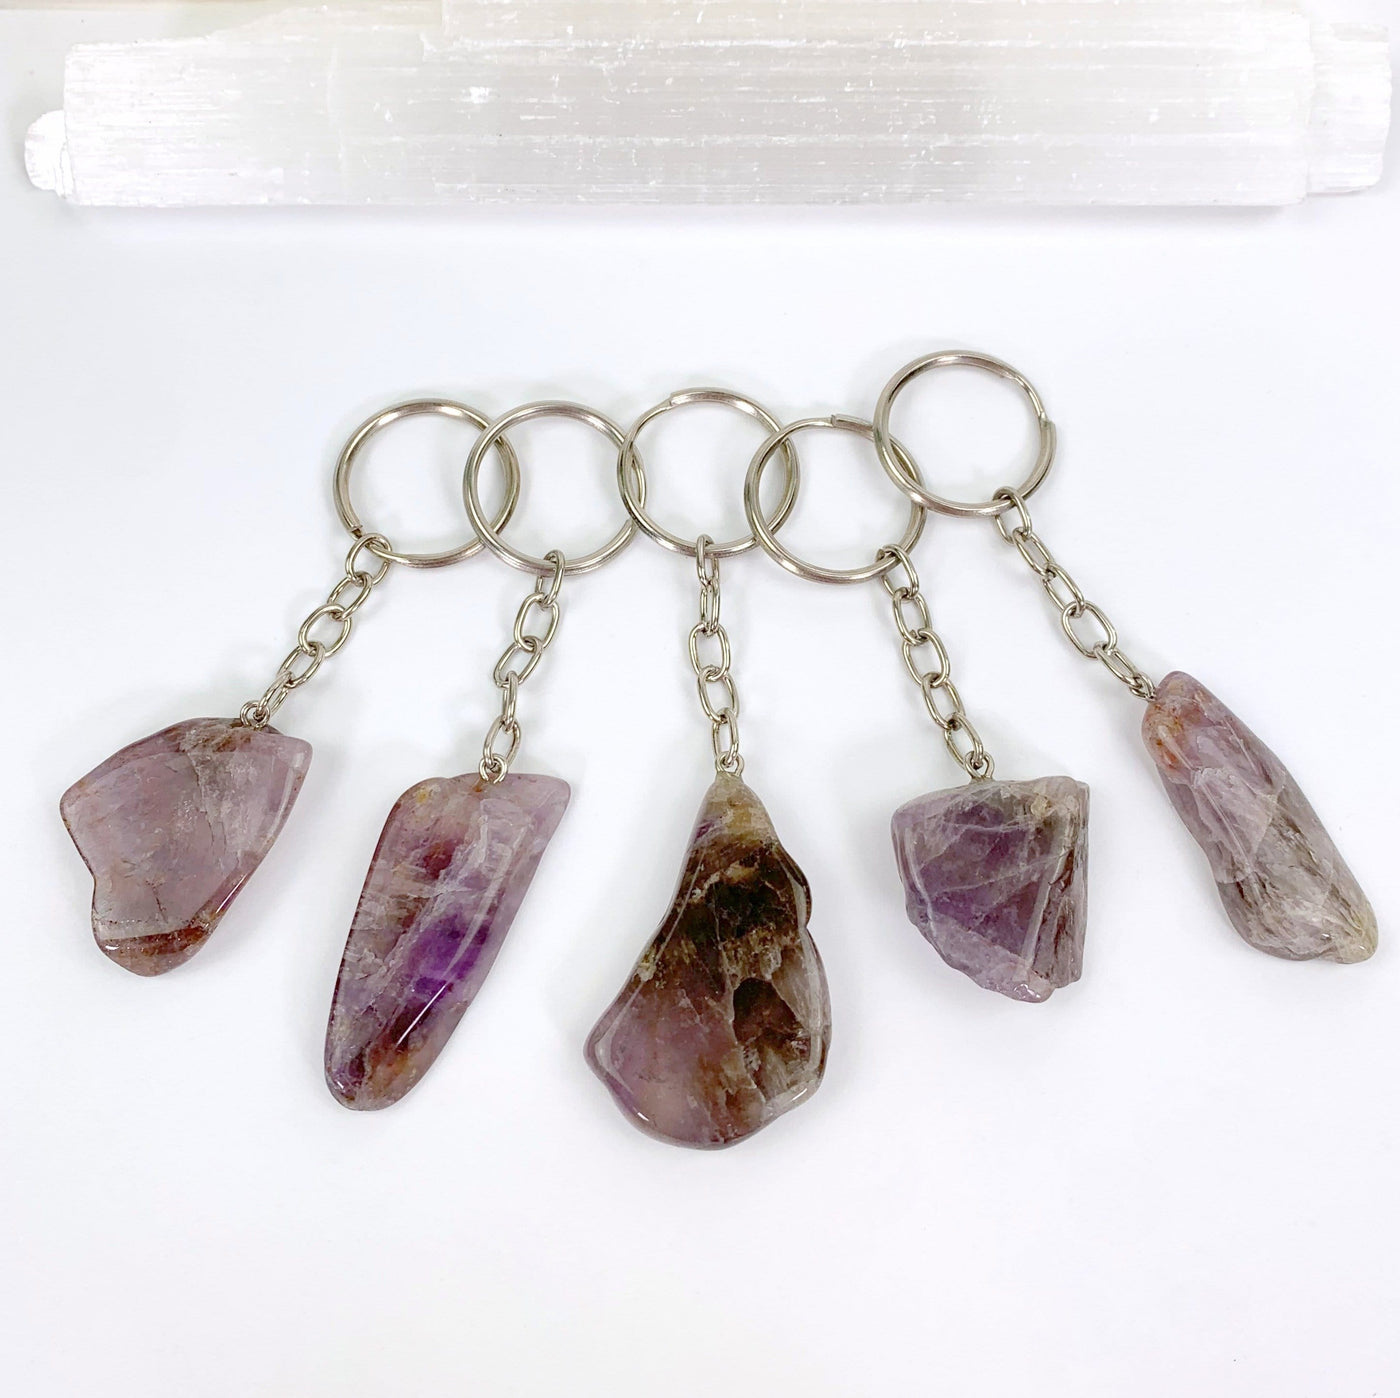 five seven mineral amethyst slab keychains on display for possible variations